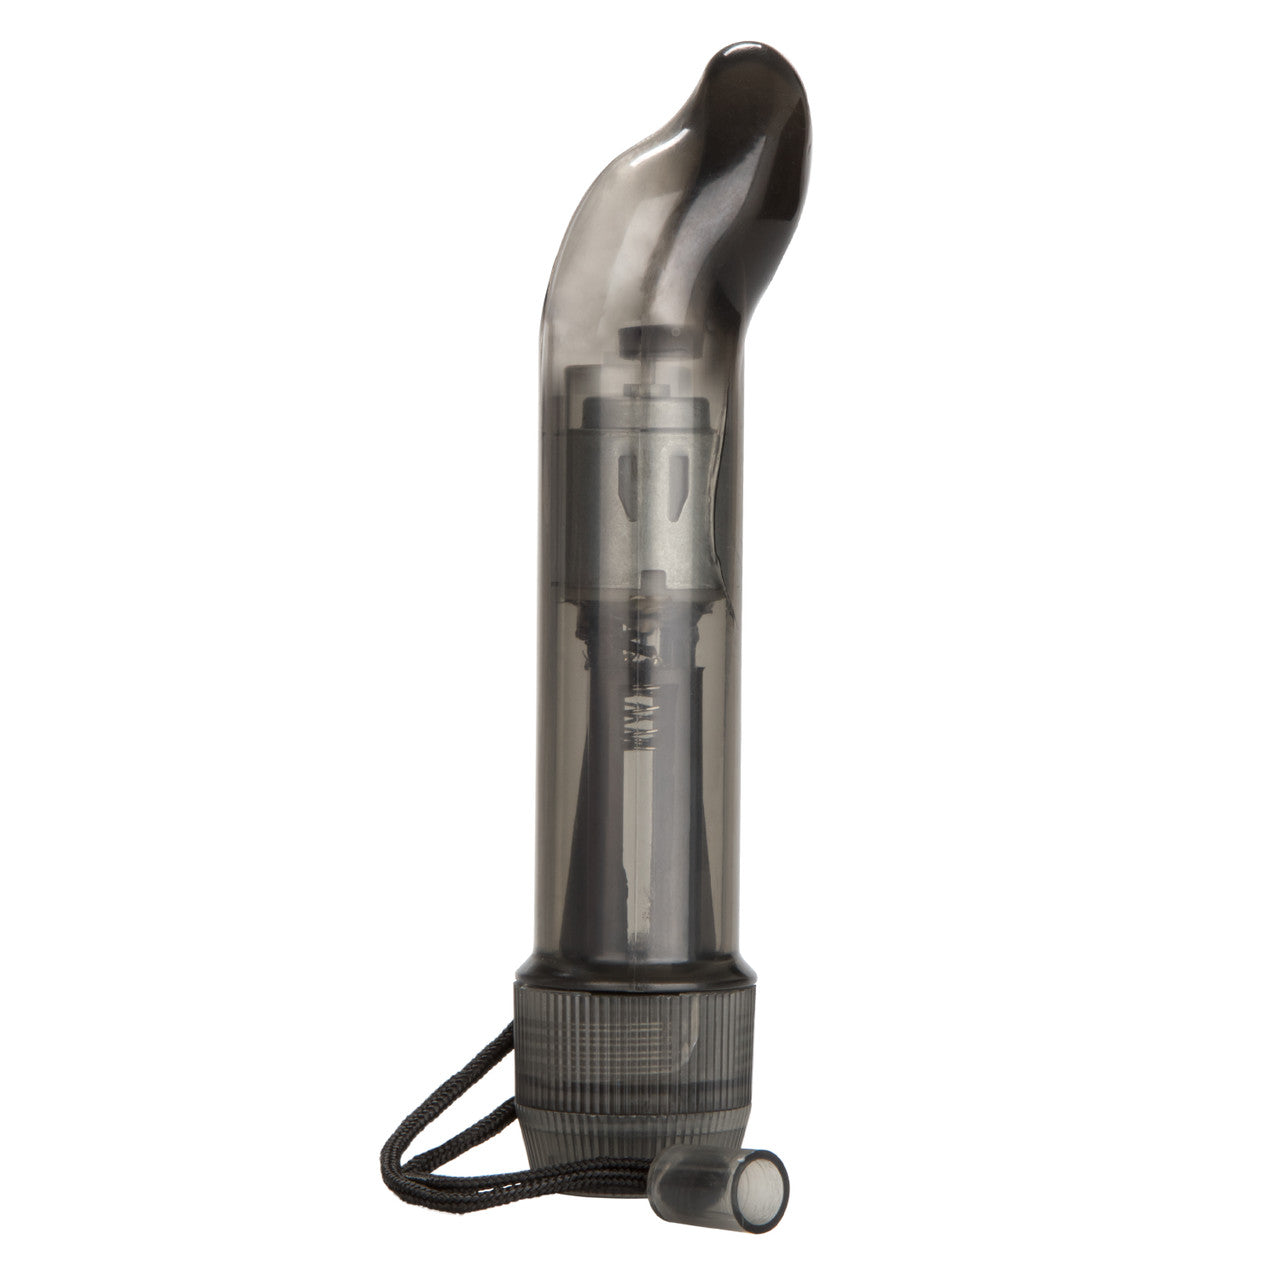 Dr. Joel Kaplan Perineum Massager 4.5 - Thorn & Feather Sex Toy Canada